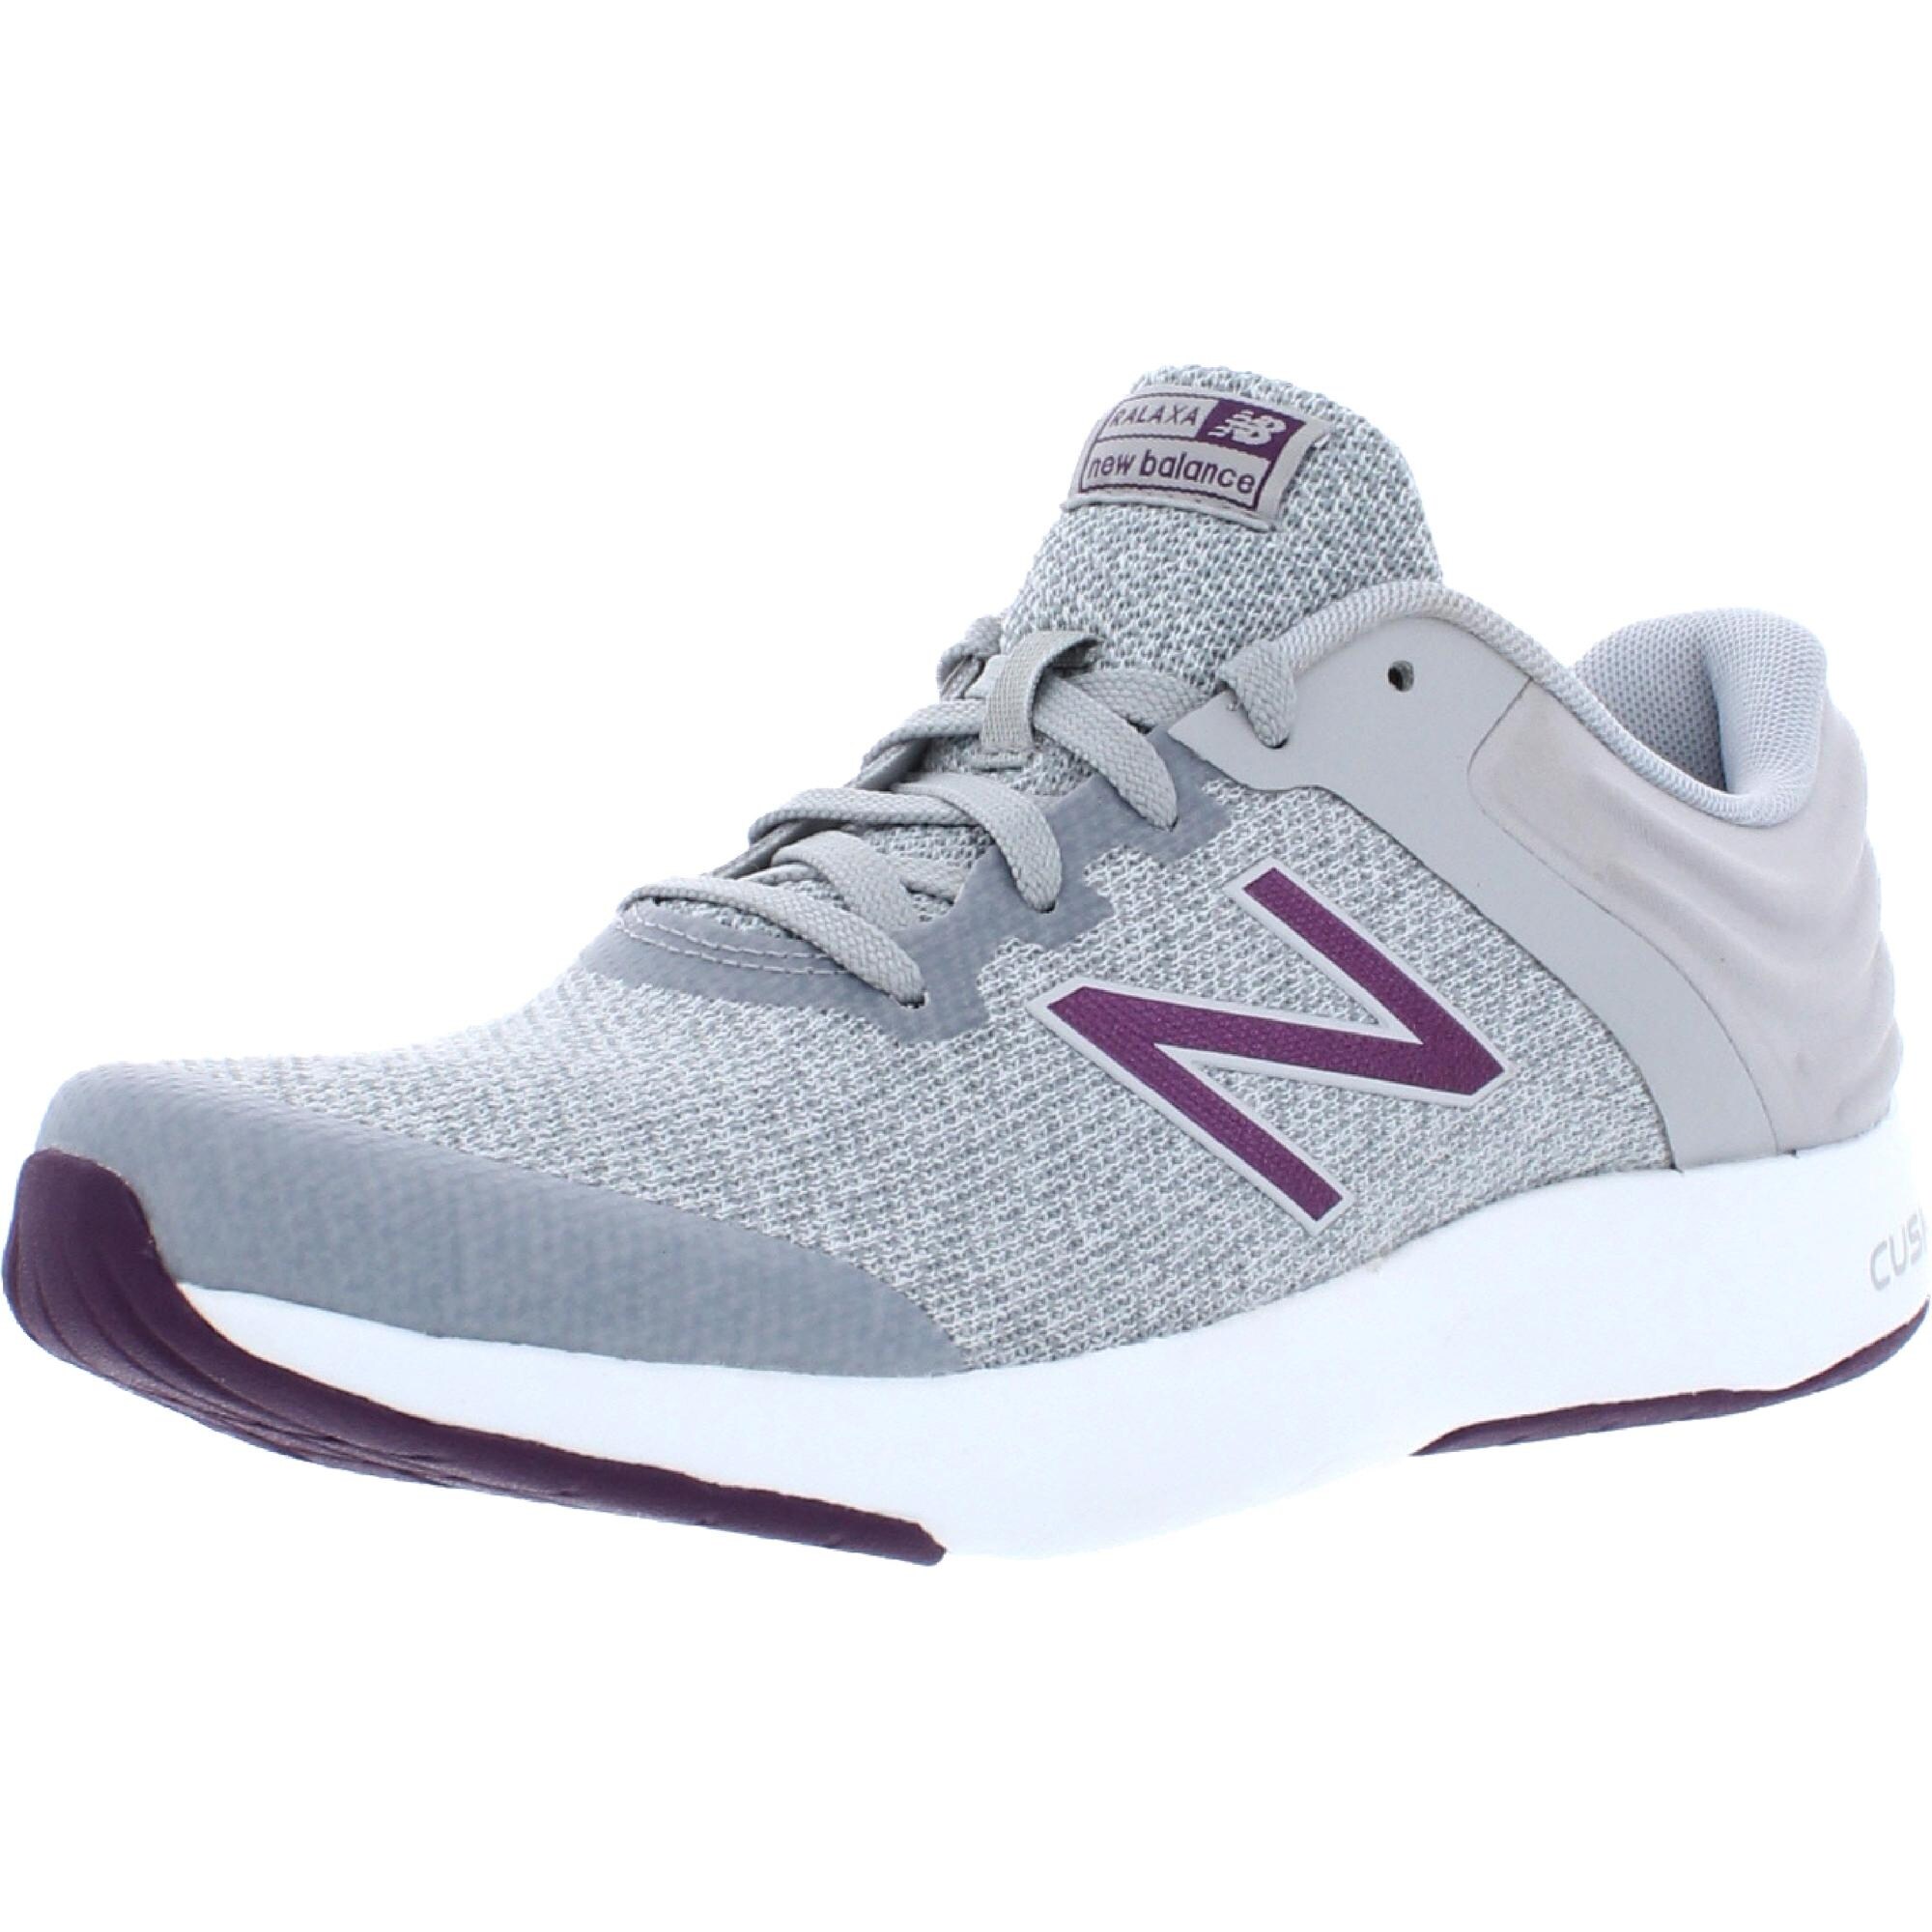 supportive new balance shoes